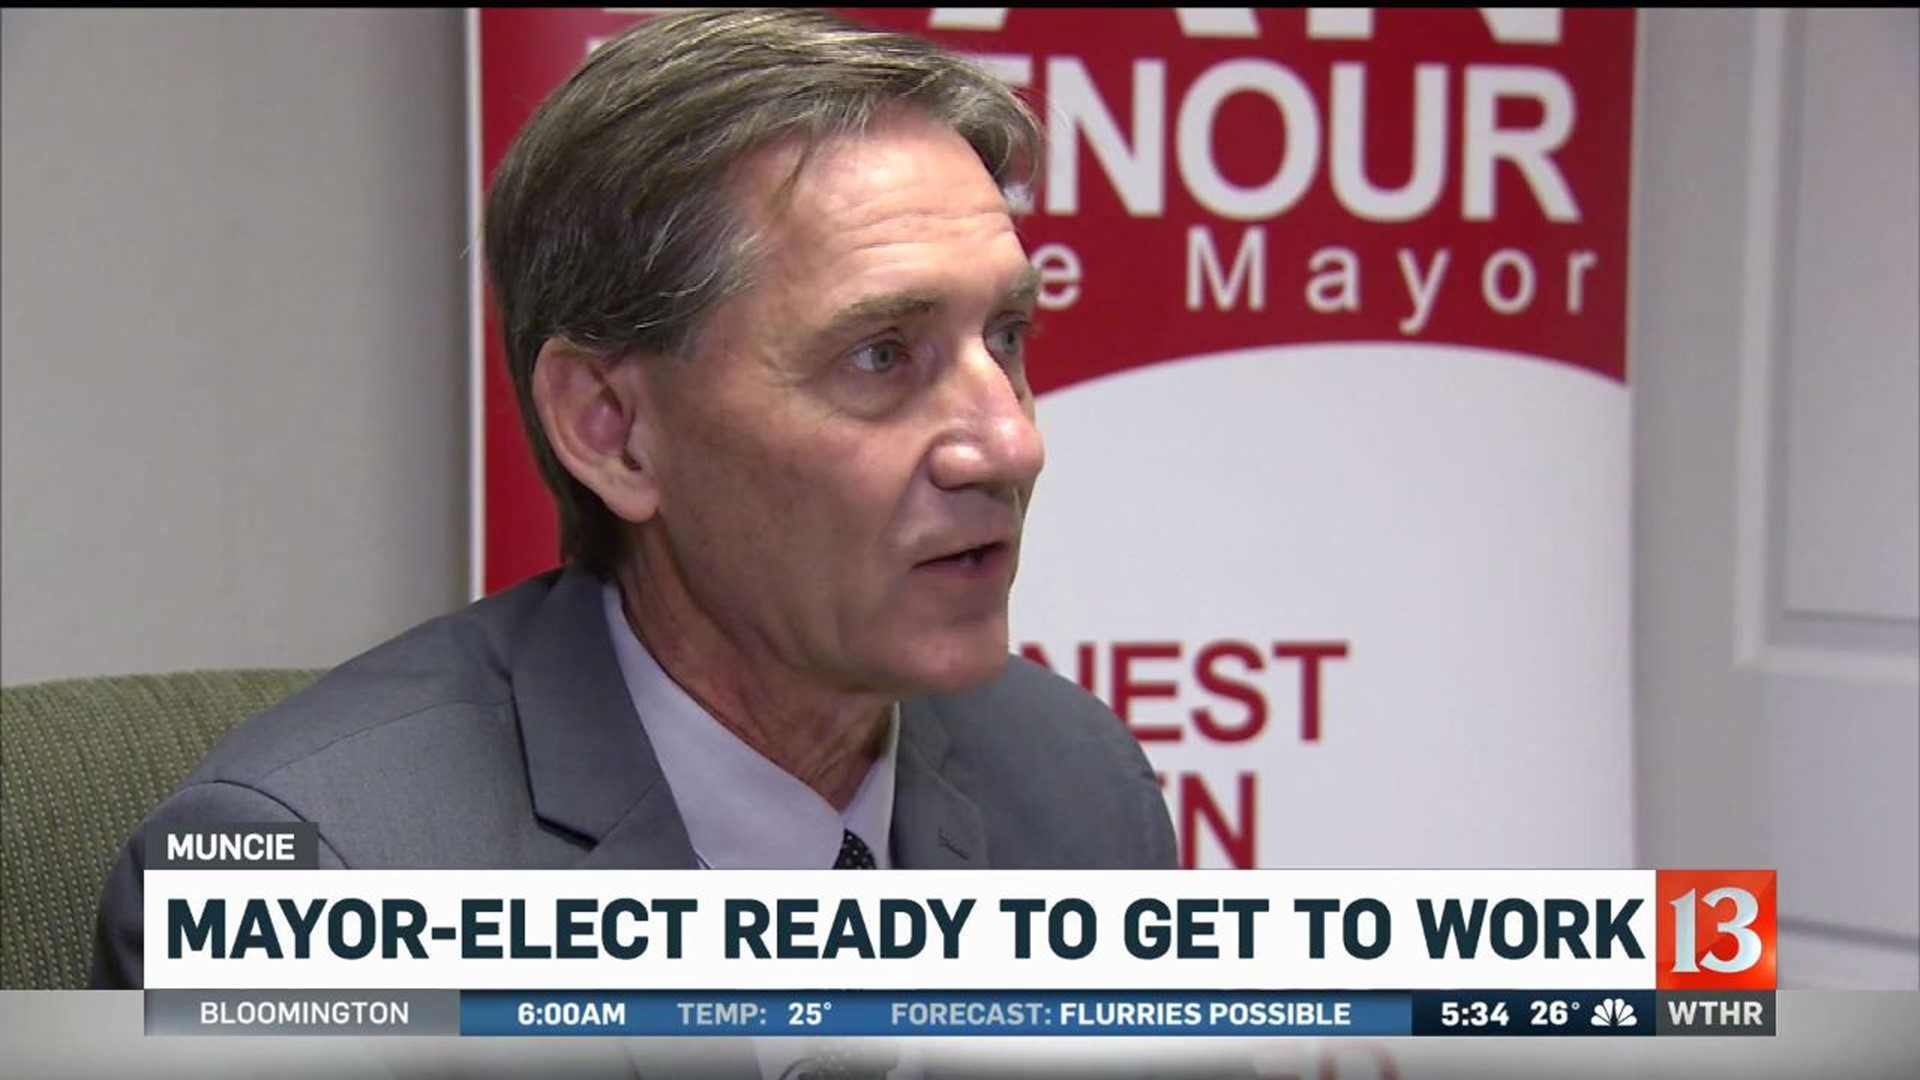 Mayor-elect ready to get to work